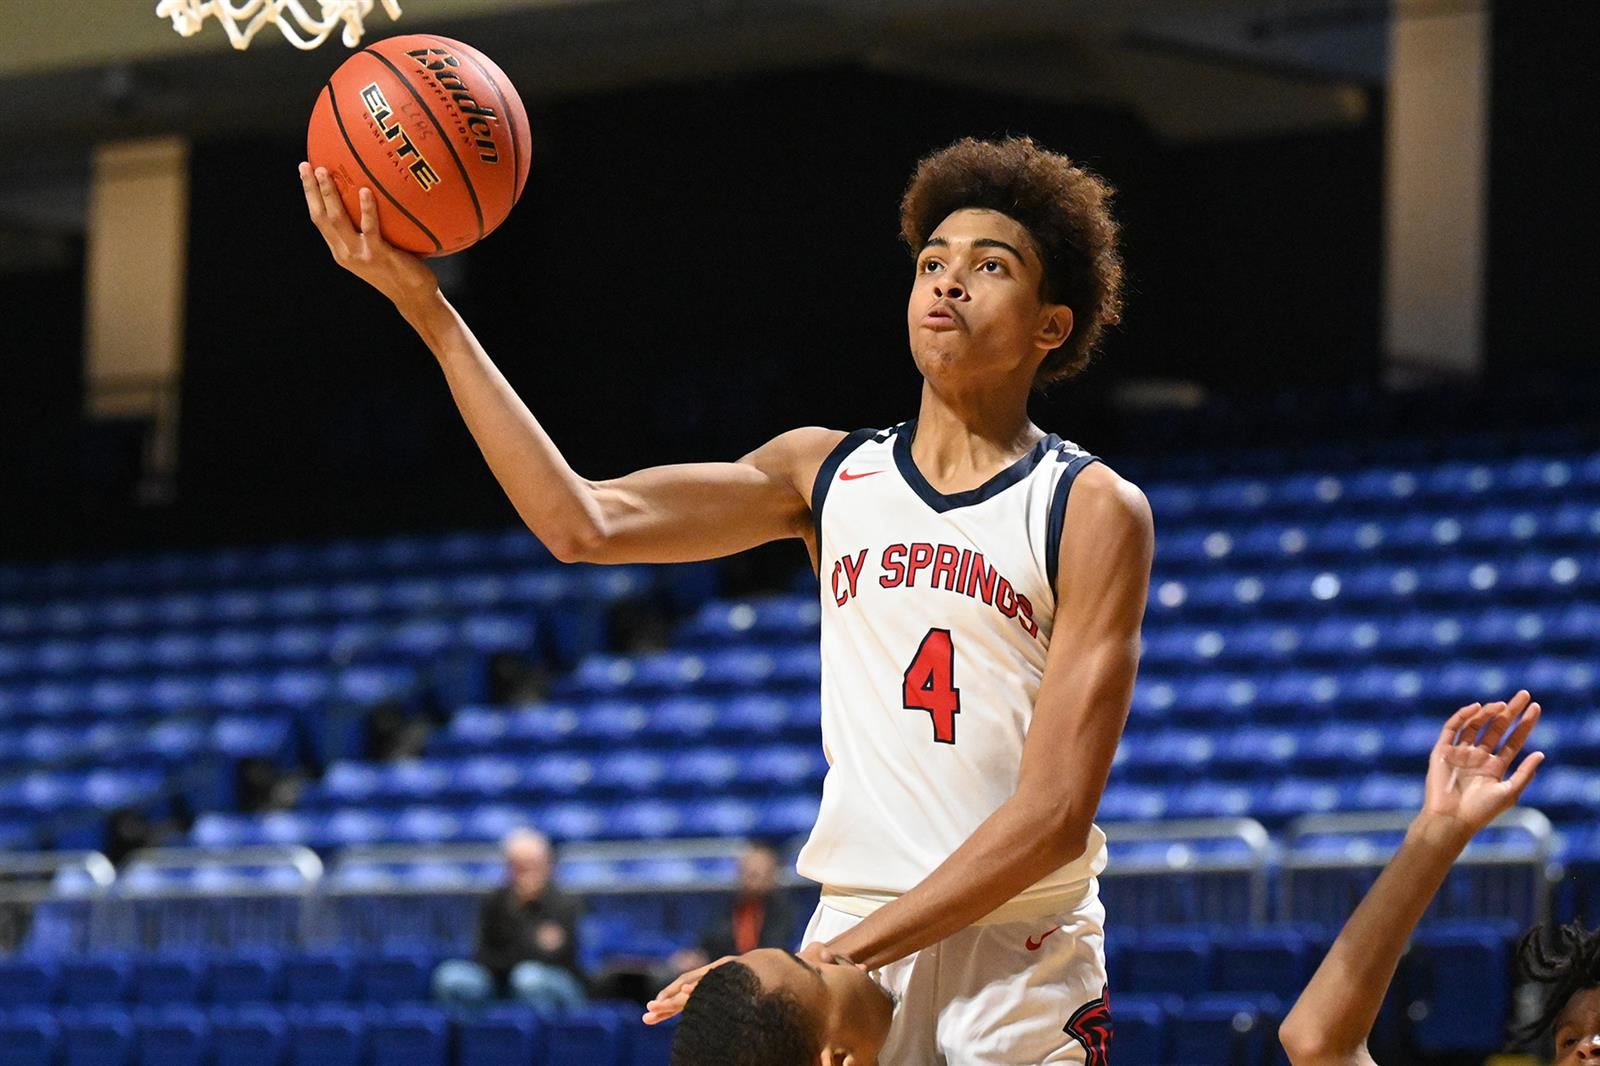 Cypress Springs High School junior Stoney Hadnot was voted the District 16-6A boys’ basketball Offensive Player of the Year.